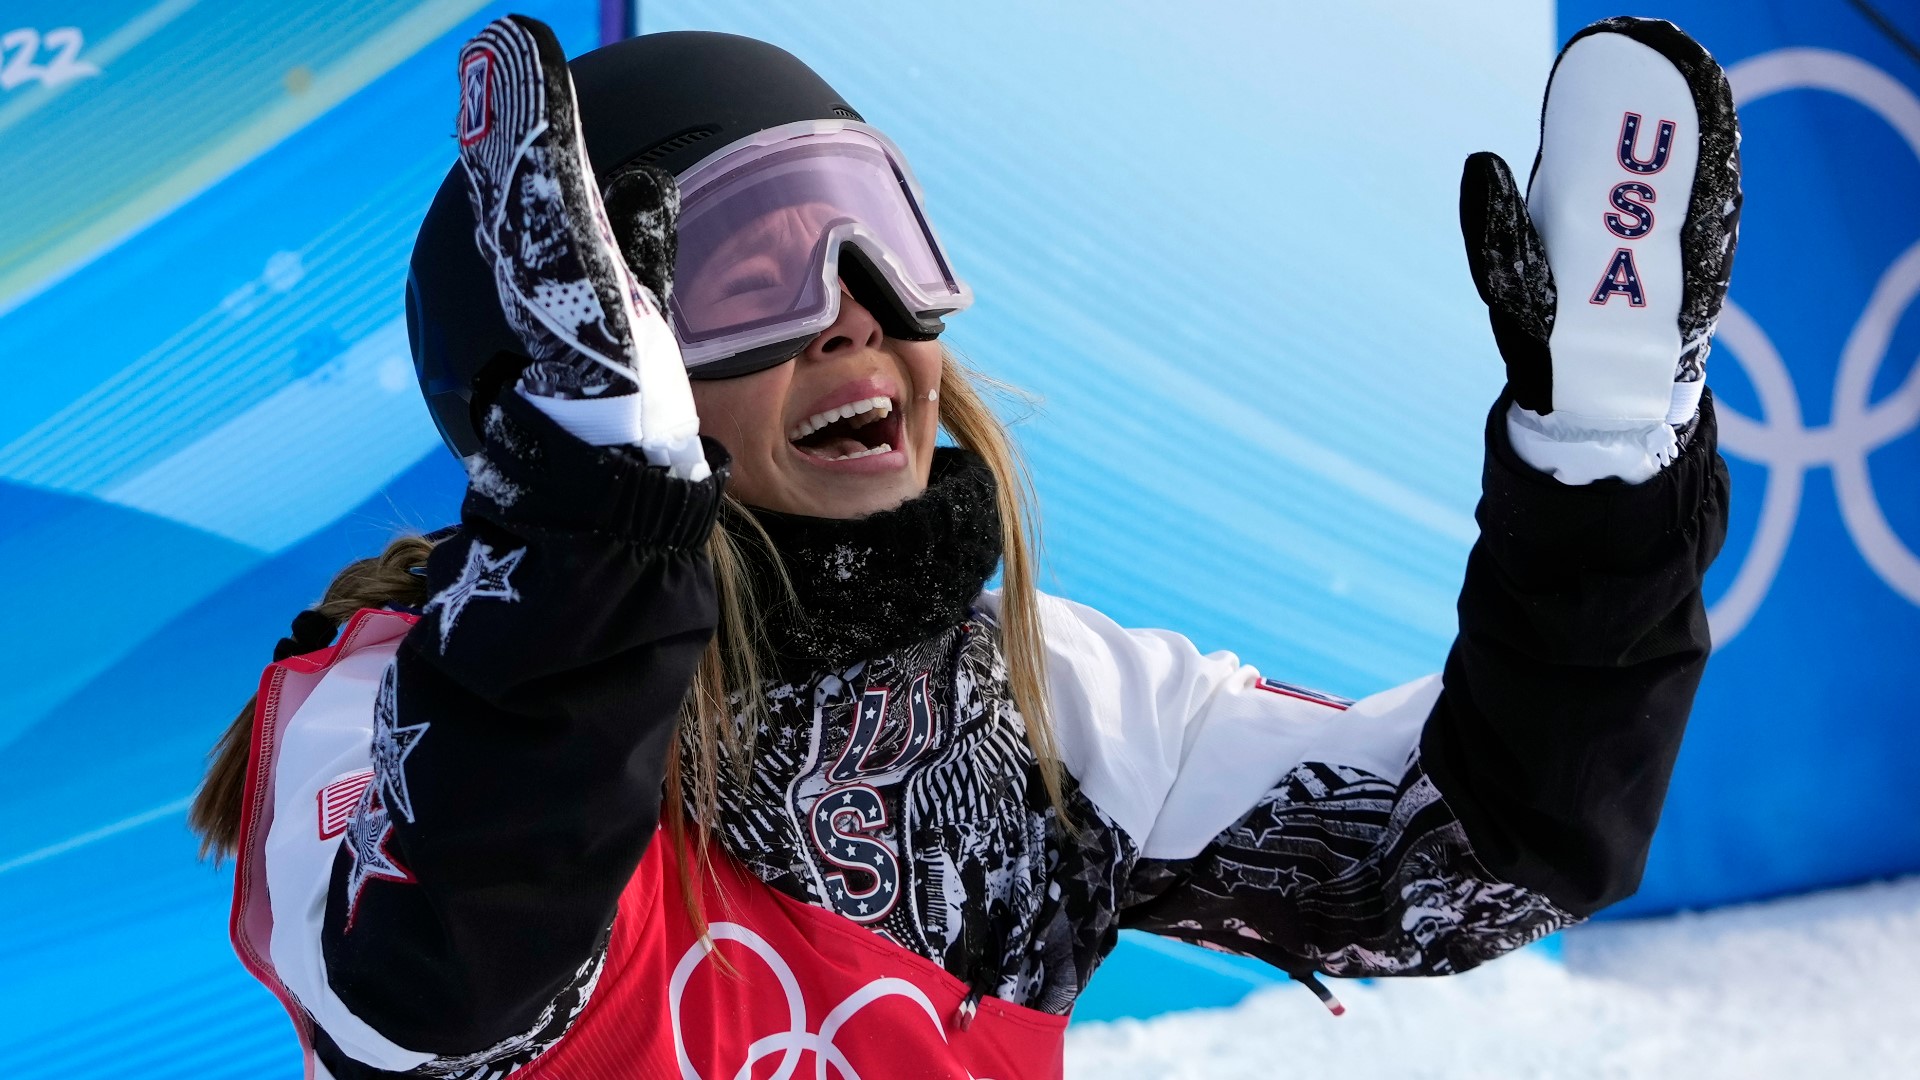 U.S. snowboarder Chloe Kim is the first woman to win back-to-back gold in the halfpipe. She scored 94.00 at the Winter Olympics in Beijing.